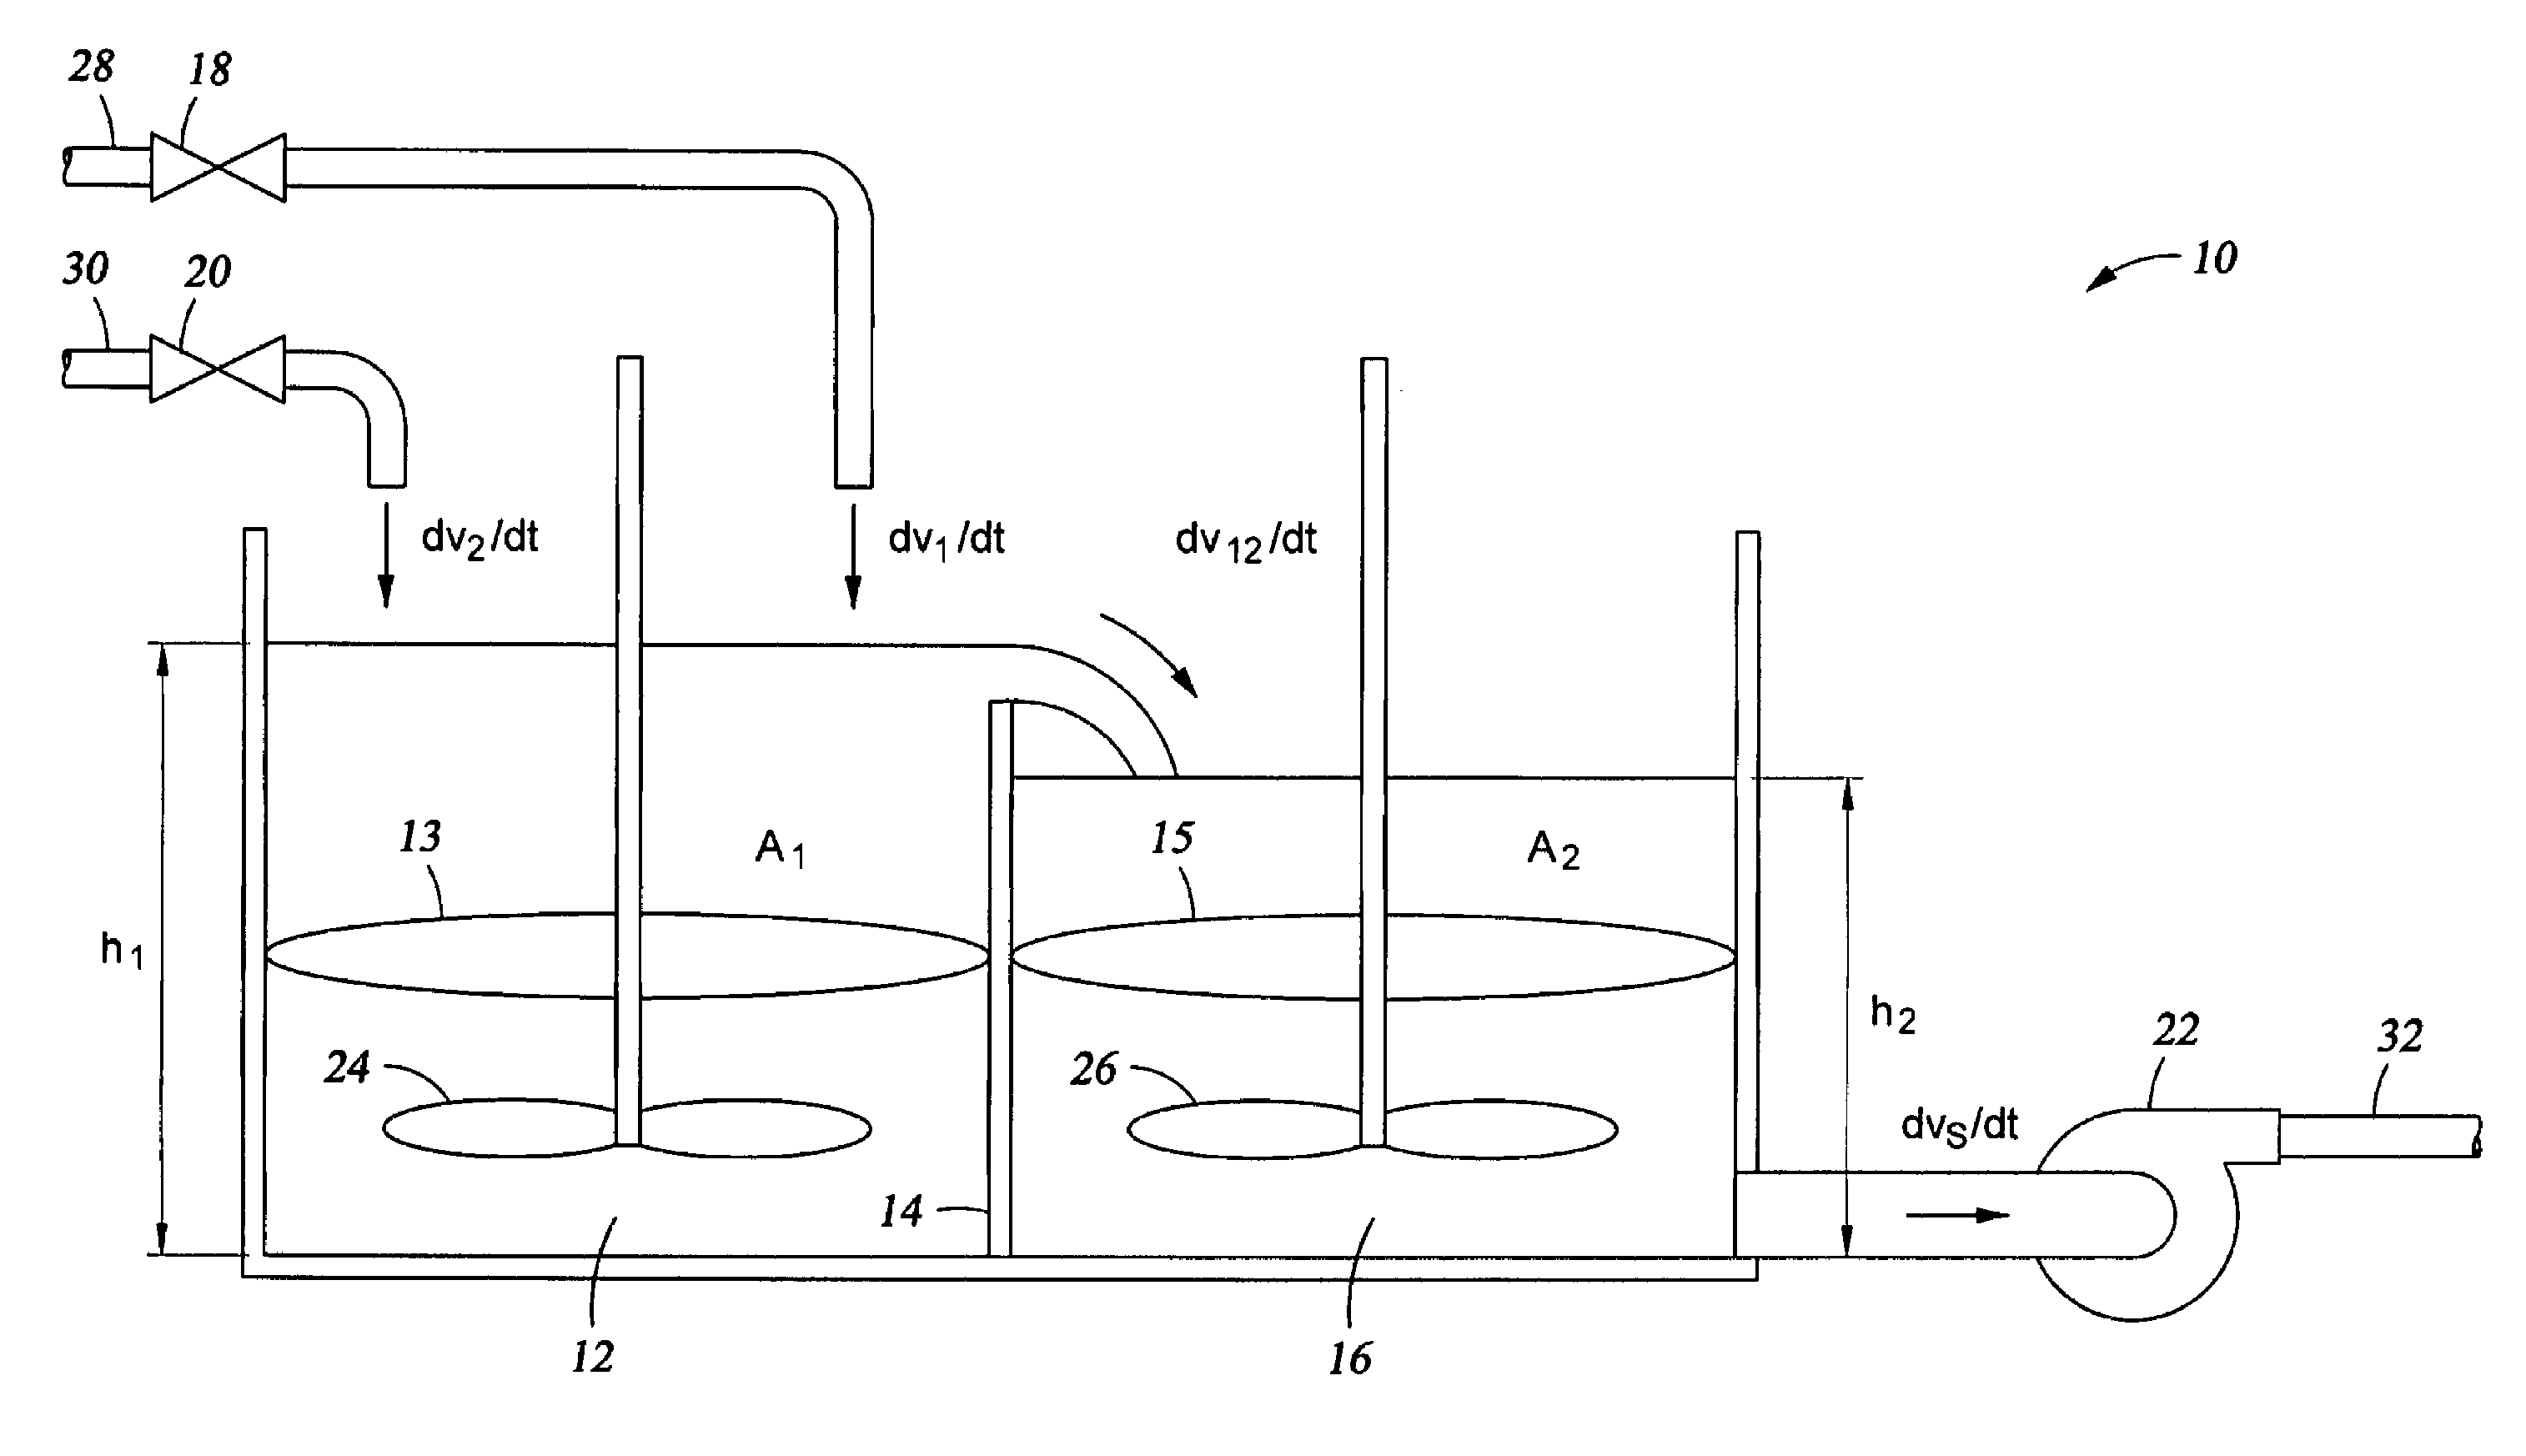 Control system design for a mixing system with multiple inputs